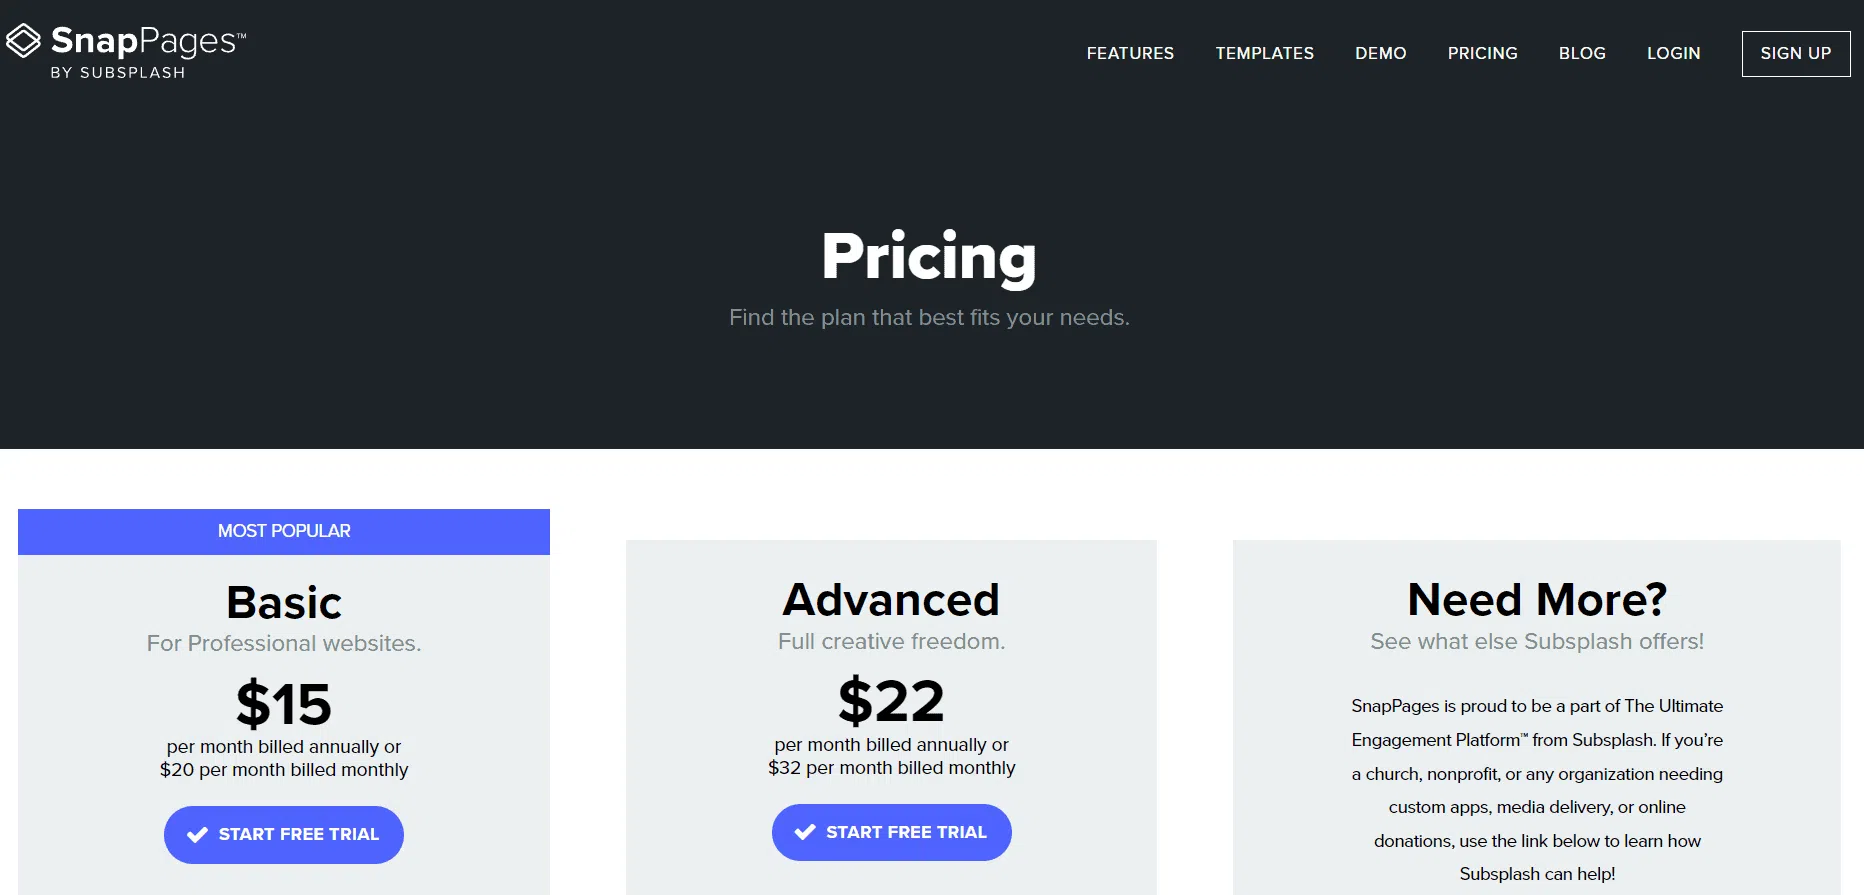 snappages pricing